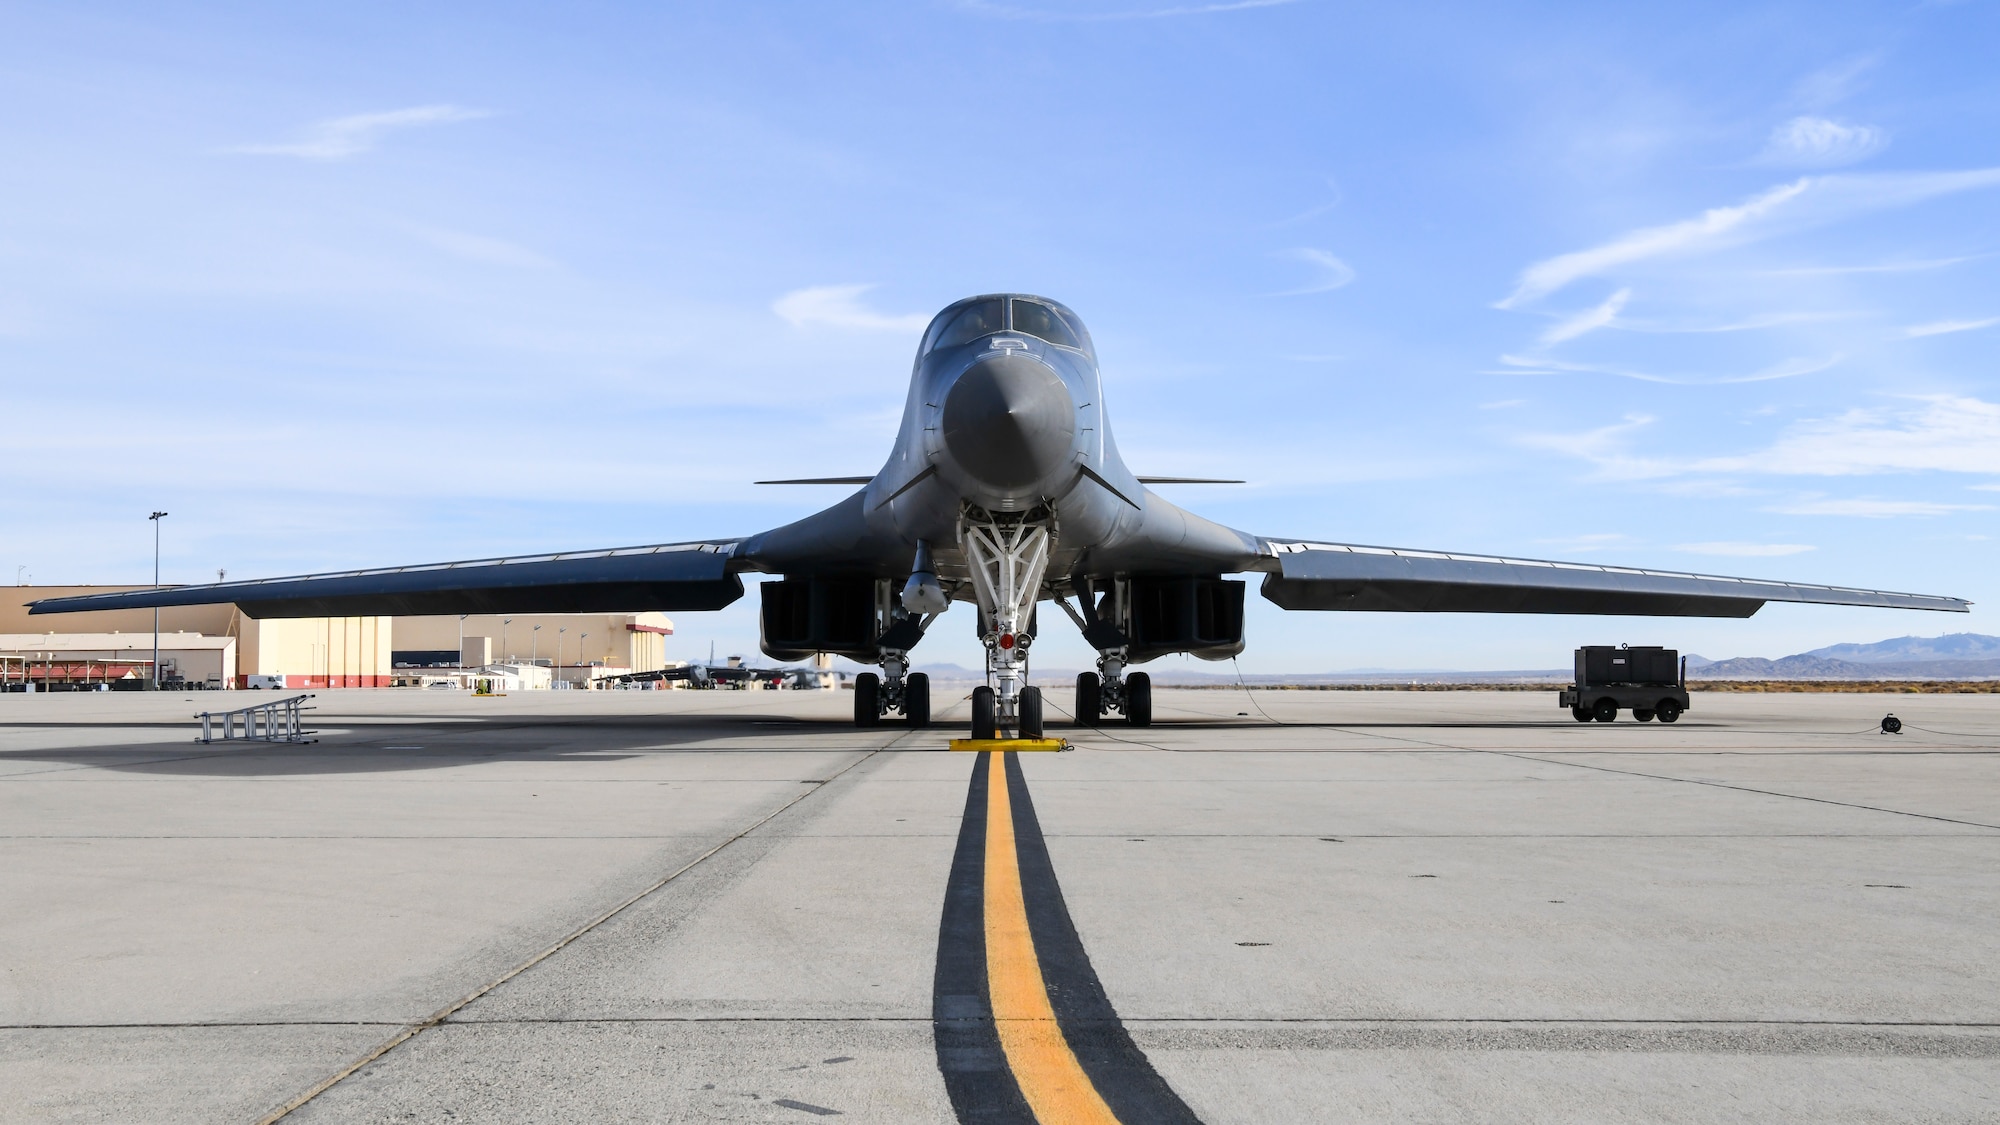 A B-1B Lancer prepares to conduct a captive carry flight to demonstrate its external weapons carriage capabilities at Edwards Air Force Base, California, Nov. 20. (Air Force photo by 2nd Lt. Christine Saunders)